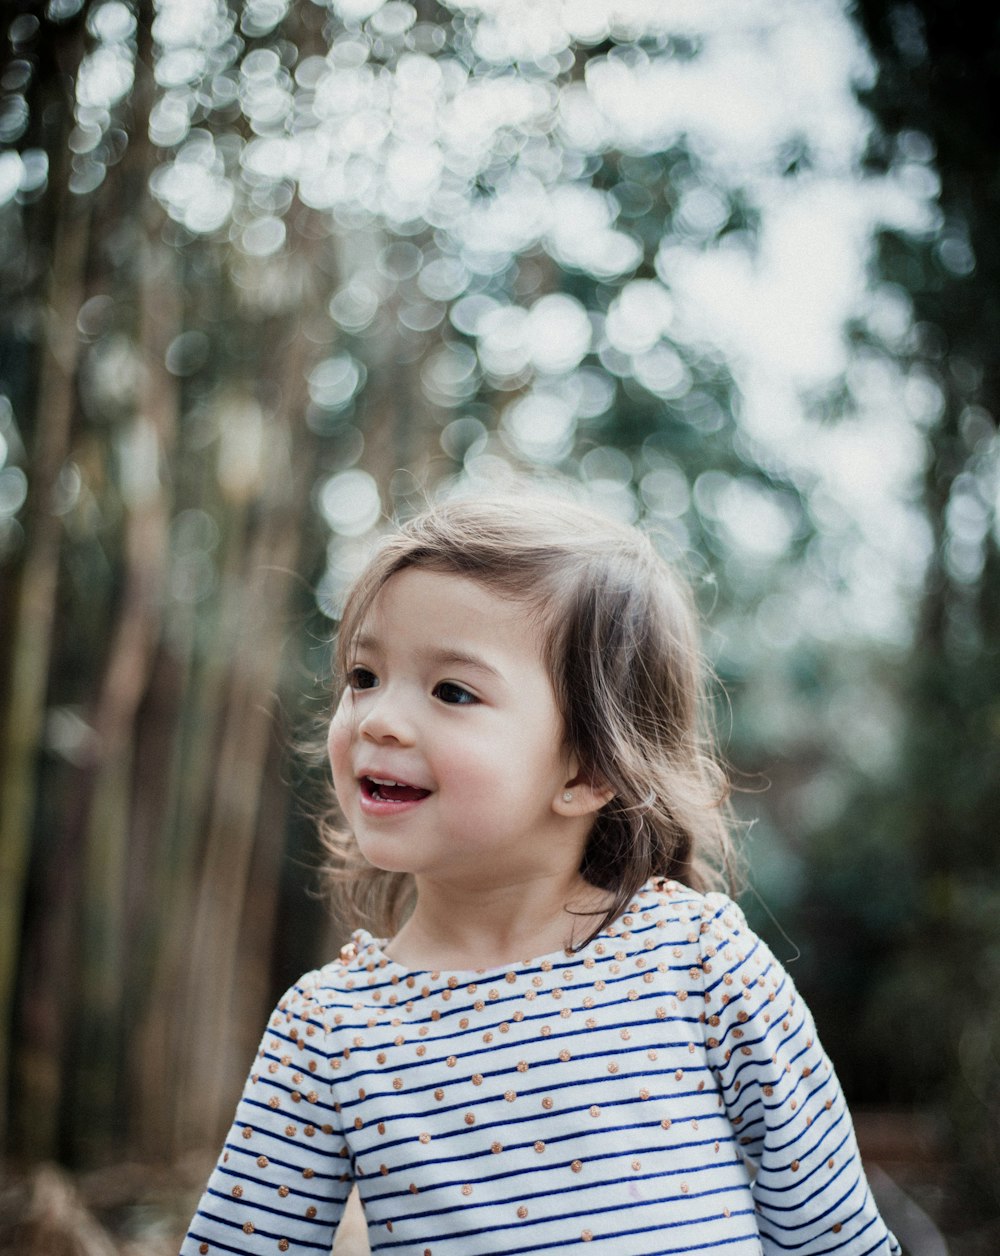 girl wearing white striped shirt near on tree forest